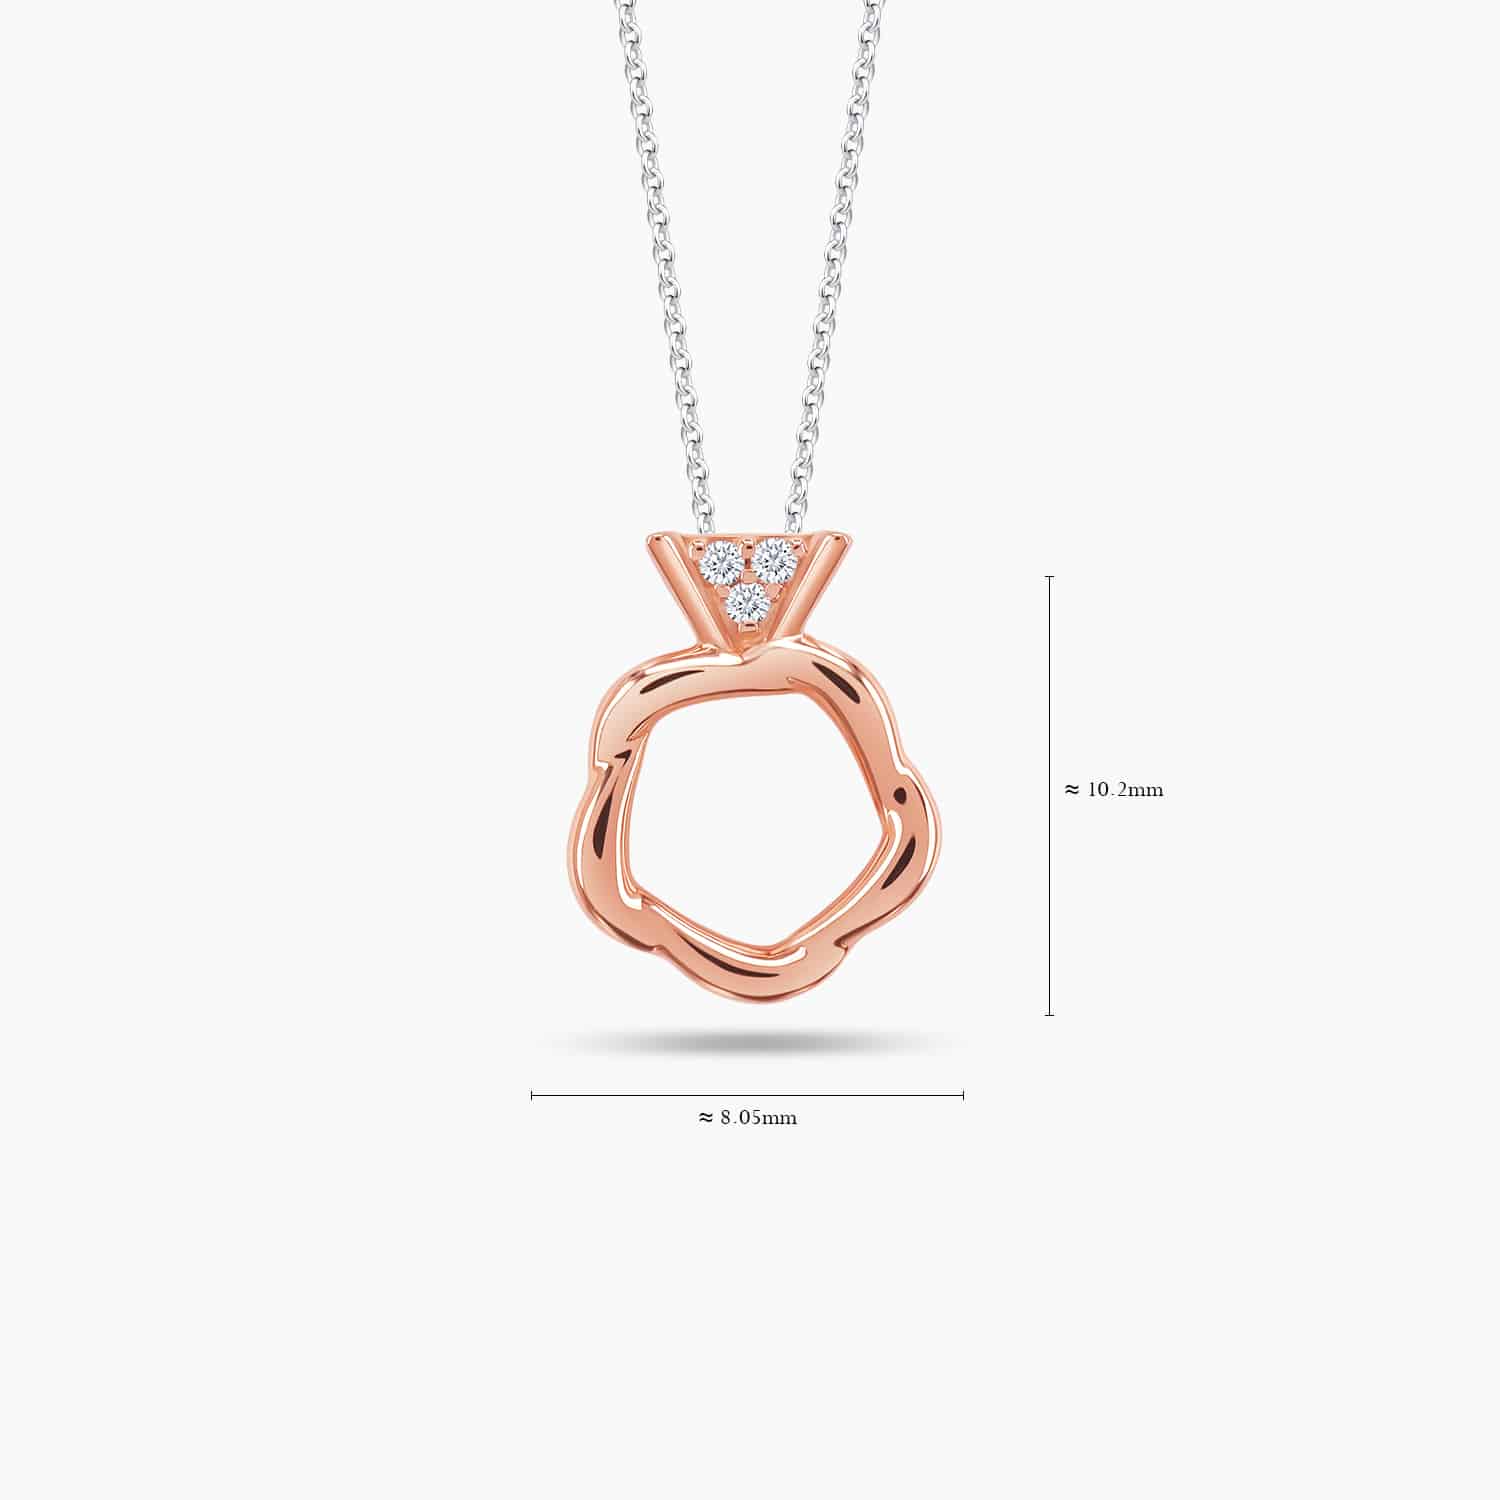 LVC Charmes Rose Mini Ring 18k rose gold Diamond Pendant with 3 diamonds. Comes with a 10K White Gold chain